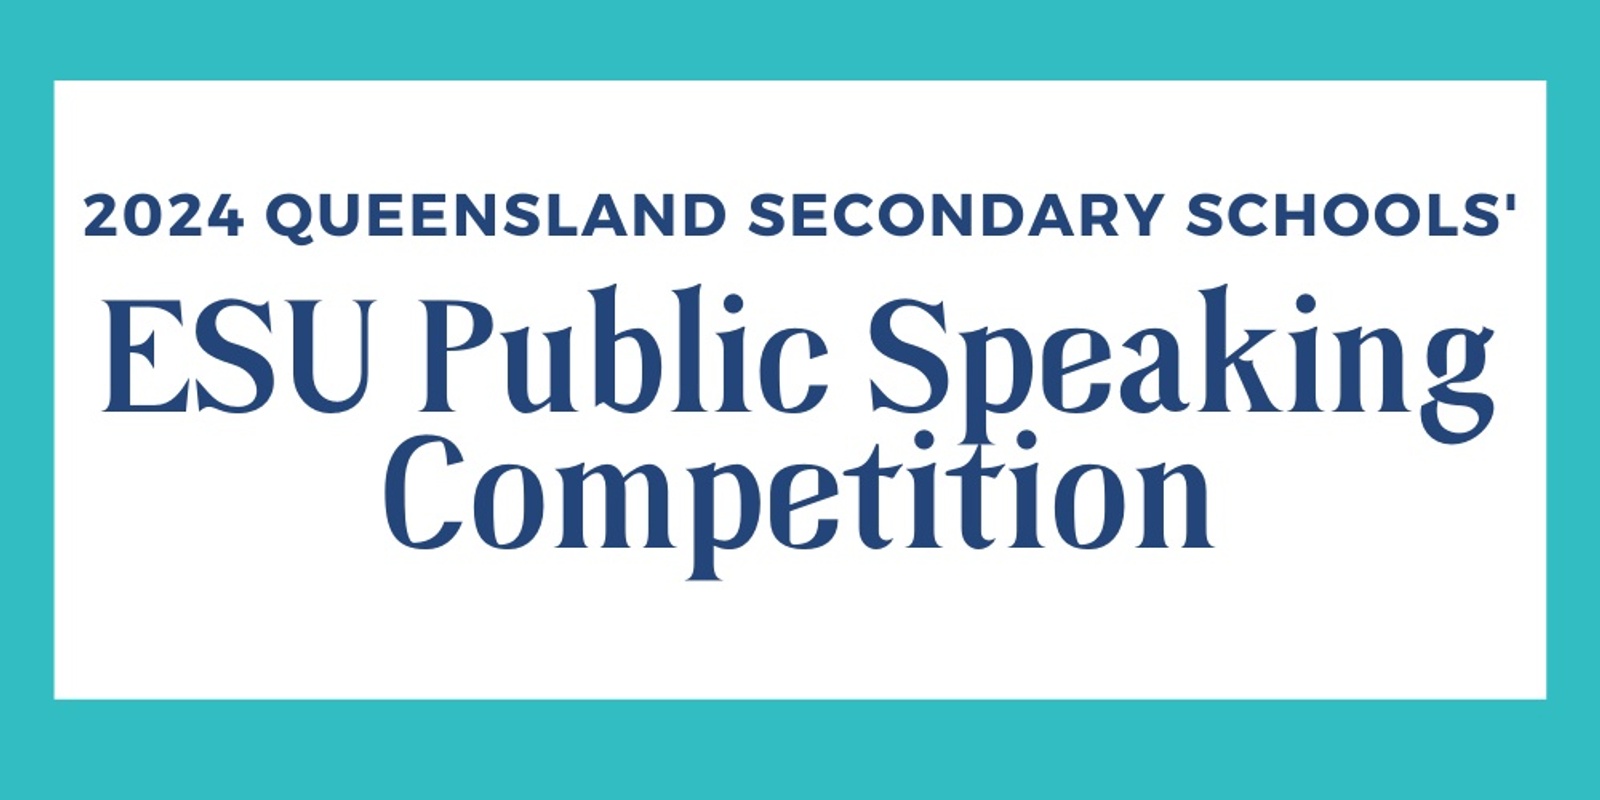 Banner image for 2024 ESU Public Speaking Competition (Toowoomba and West) - Senior Division